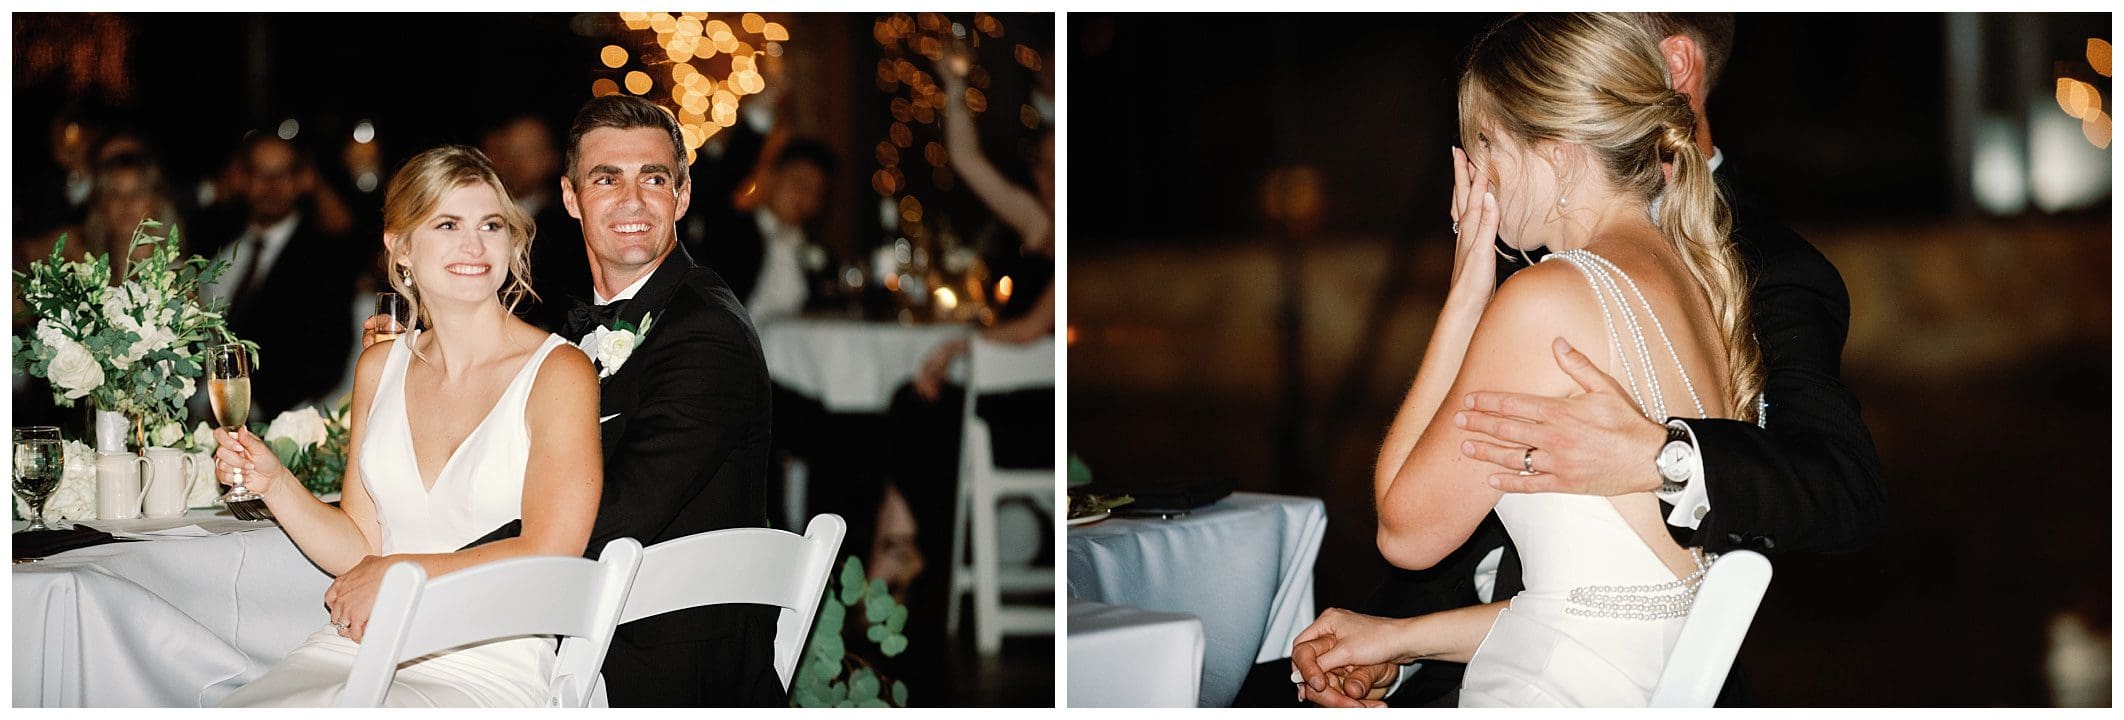 Two pictures of a bride and groom at a fall wedding reception at Crest Center.